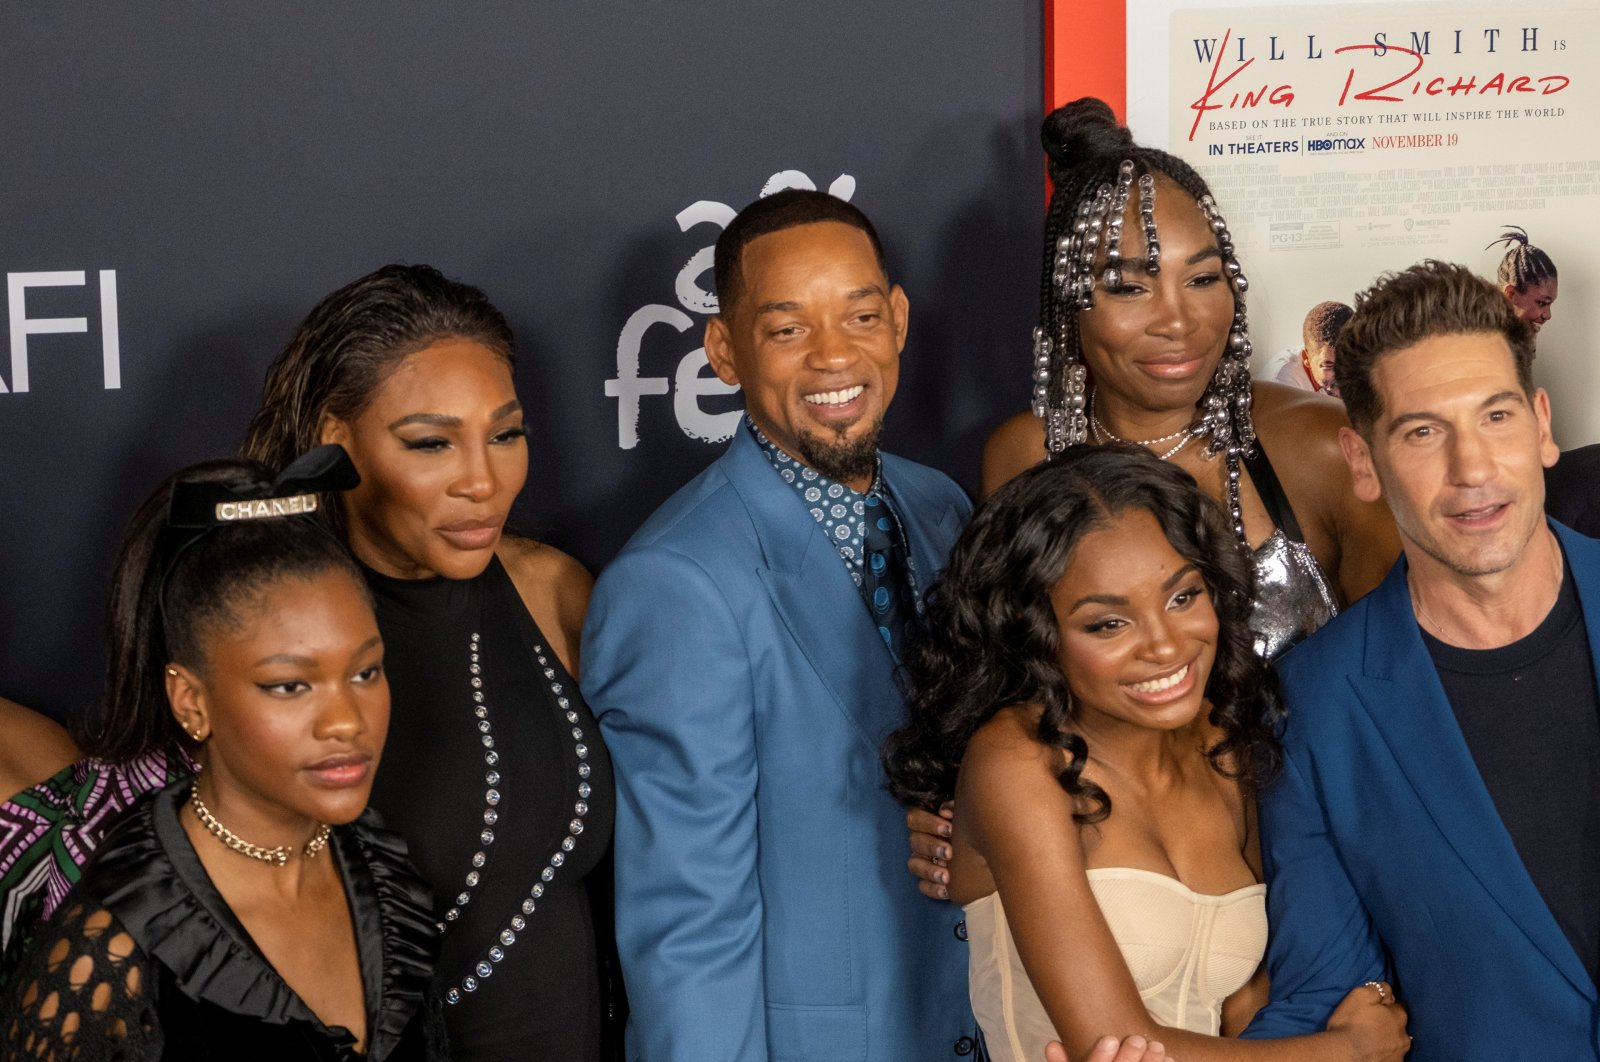 From left to right, Demi Singleton, Serena Williams, Will Smith, Saniyya Sidney, Venus Williams and Jon Bernthal attend the 2021 AFI Fest Closing Night Premiere screening for &quot;King Richard&quot; at TCL Chinese Theatre in Los Angeles, California, U.S., Nov. 14, 2021. (Reuters Photo)